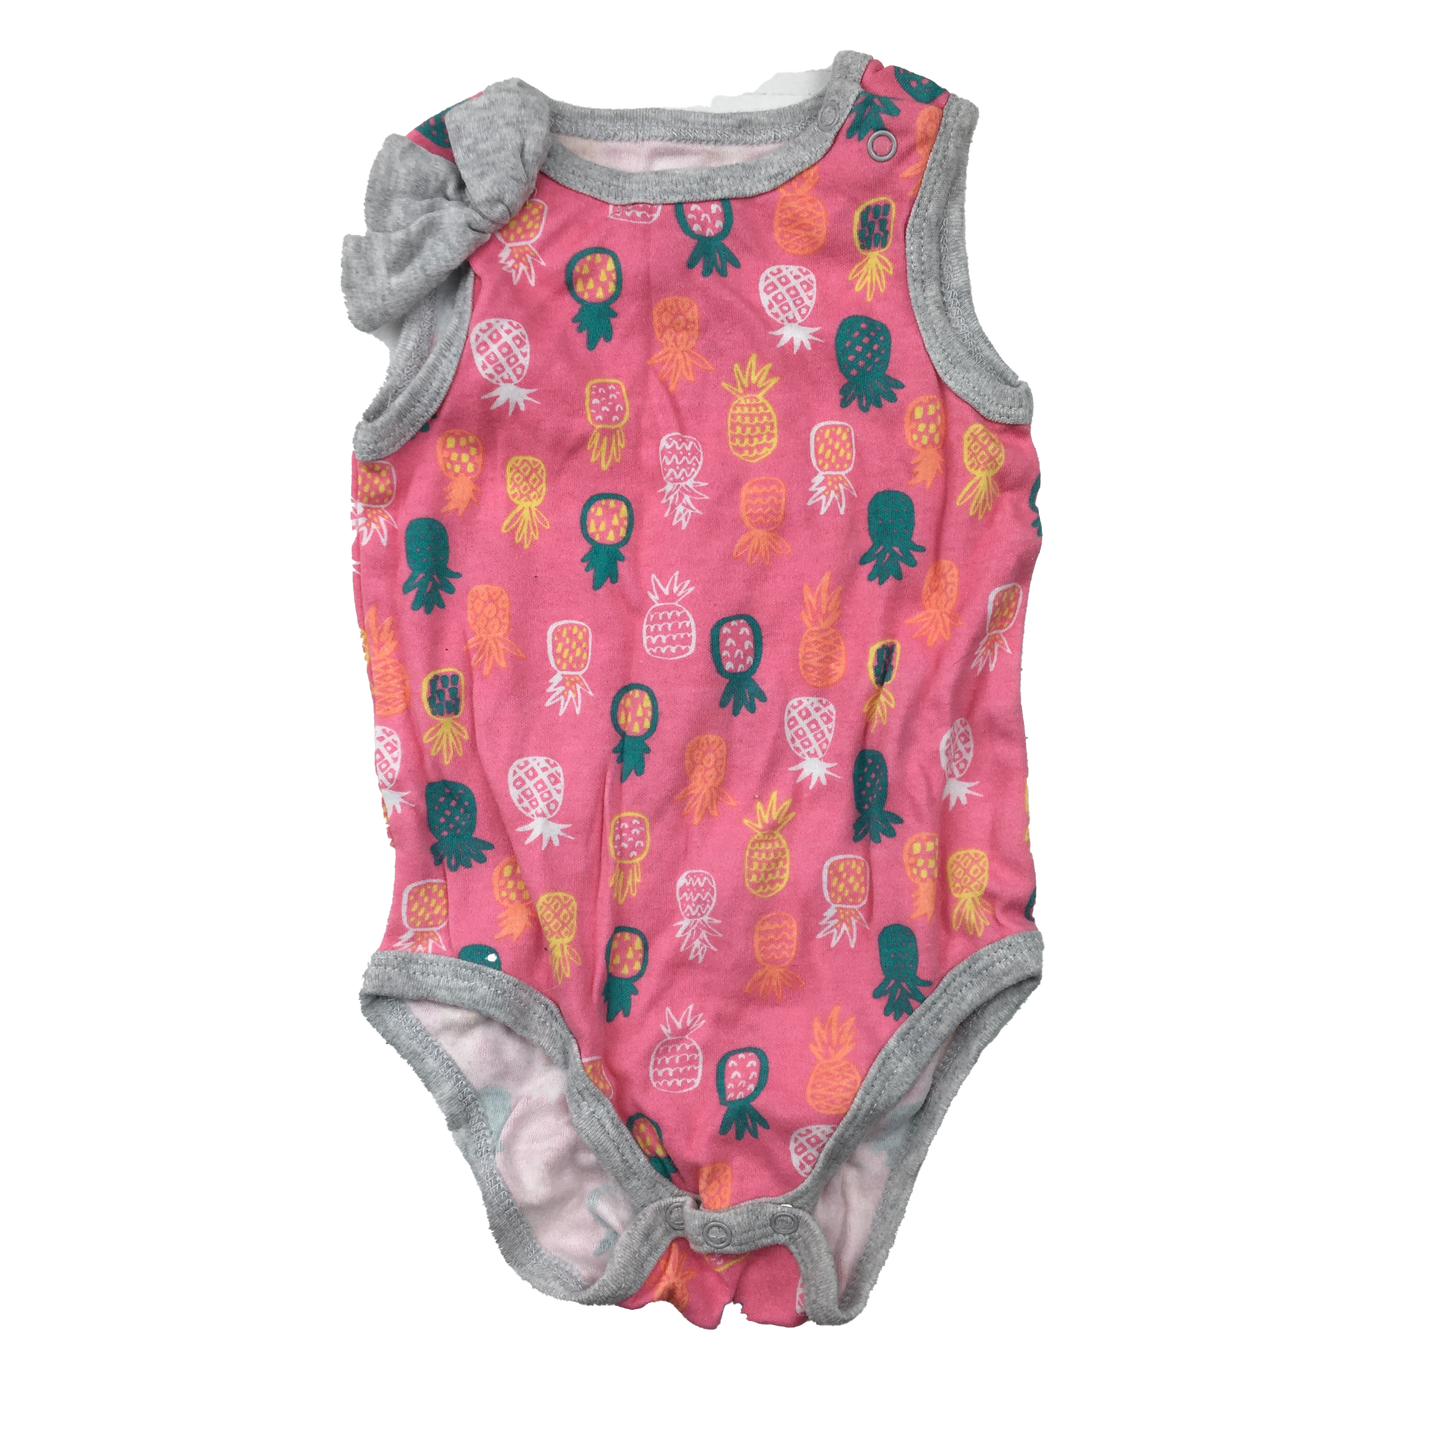 Monkey Bars Pink Tank Top Onesie with Pinapples 0-3M